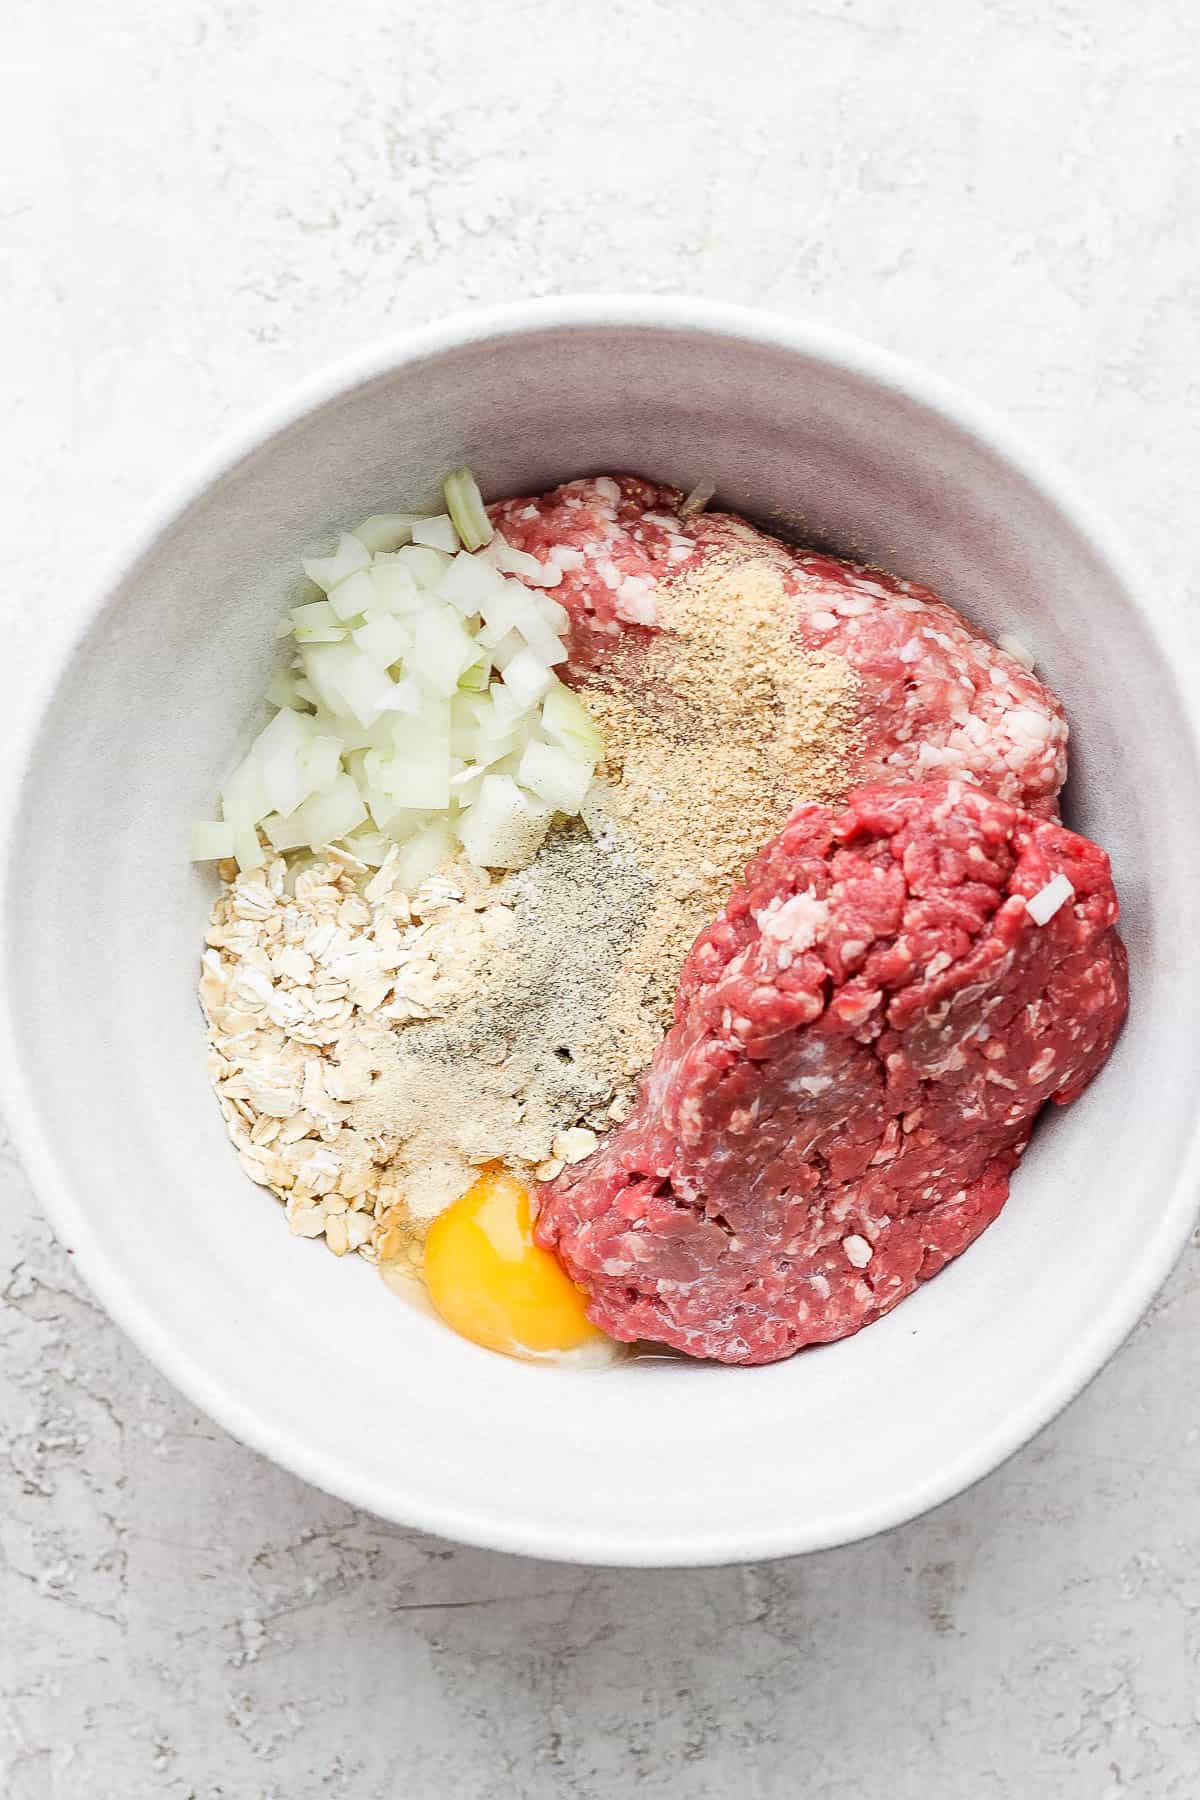 Meatloaf ingredients in a mixing bowl.